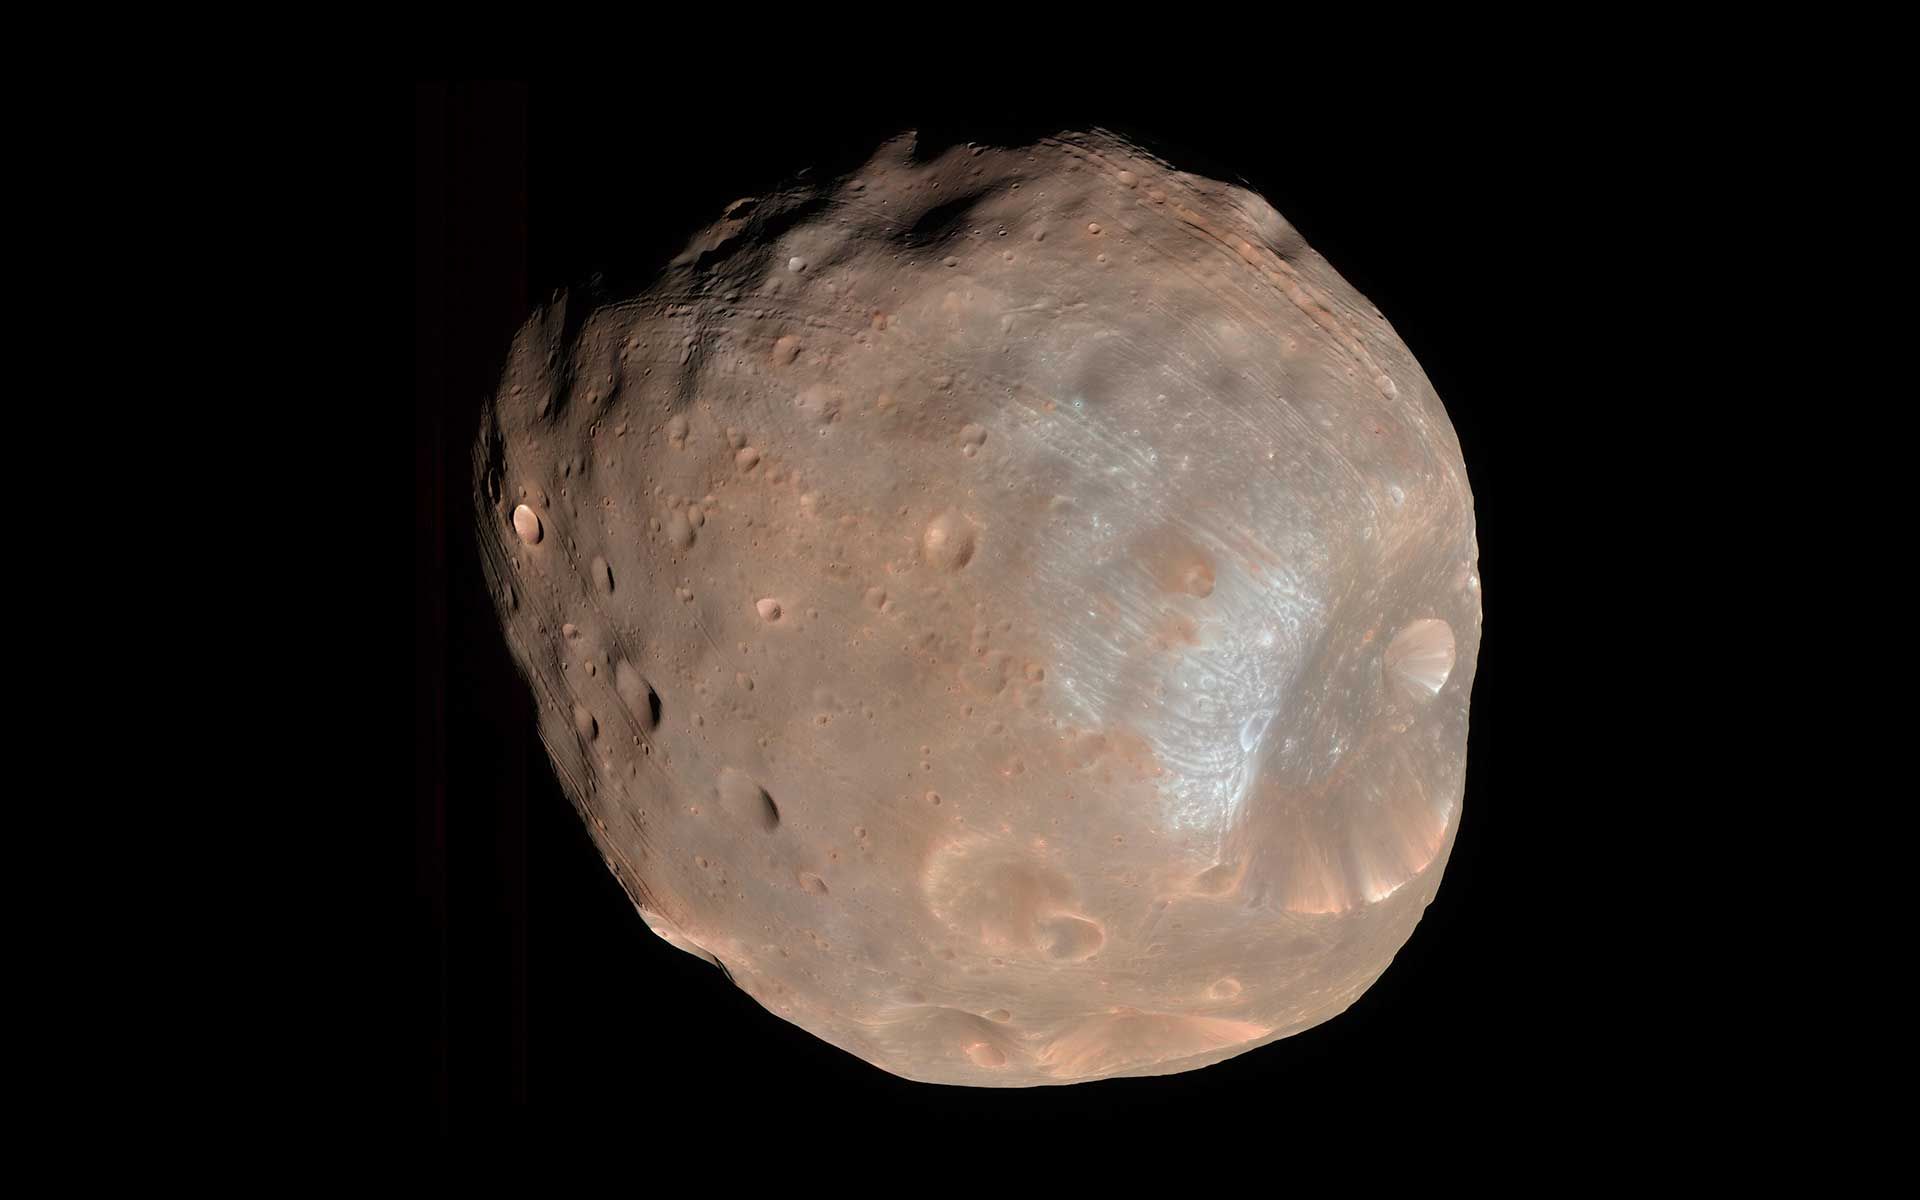 Mars' moon Phobos is seen against the darkness of space.